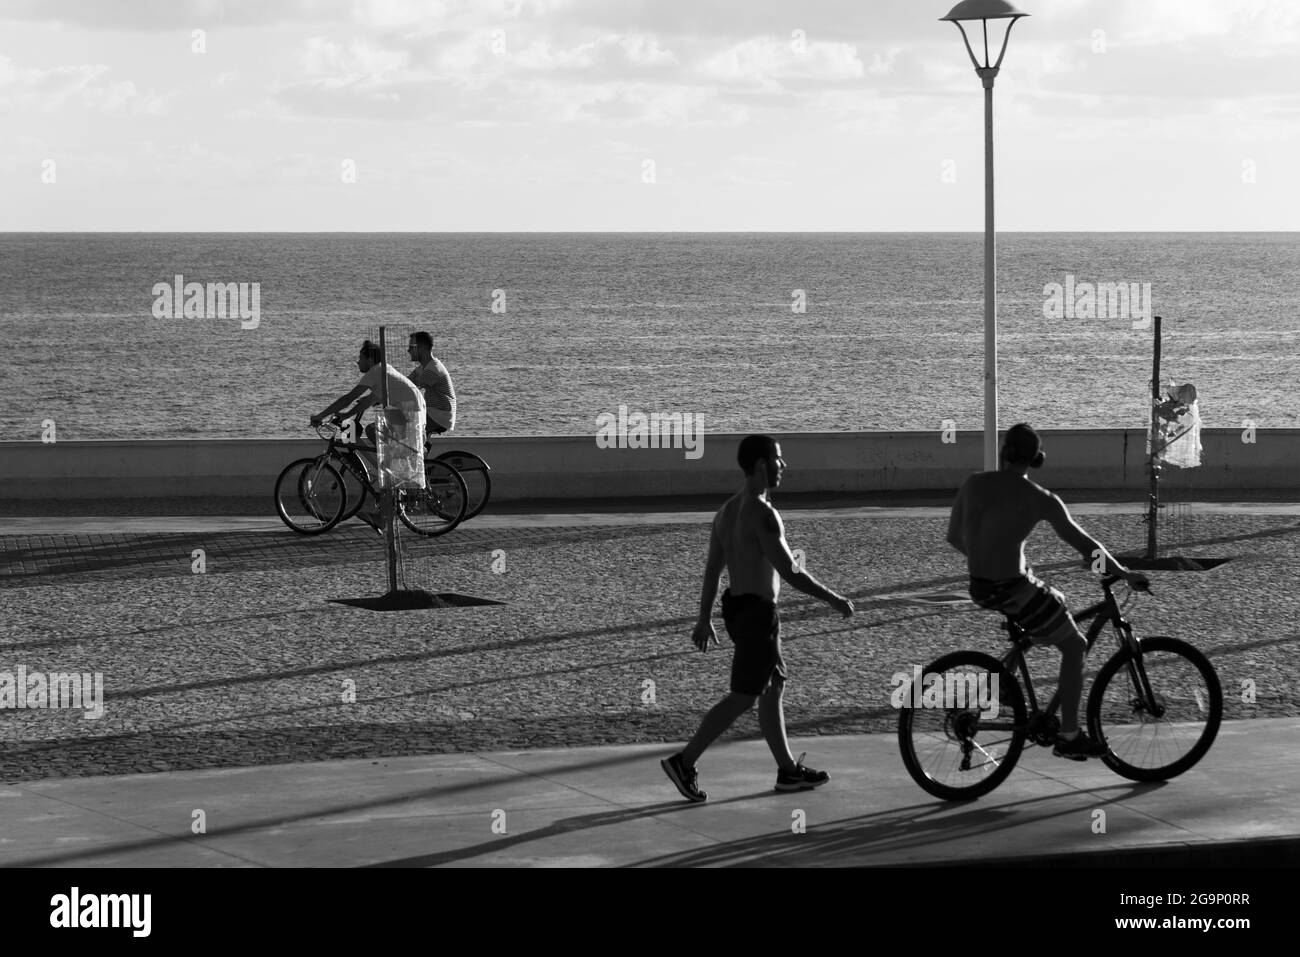 Salvador, Bahia, Brazil - December 16, 2018: People ride bicycles along the Rio Vermelho beachfront in Salvador. A day with strong sunshine that attra Stock Photo